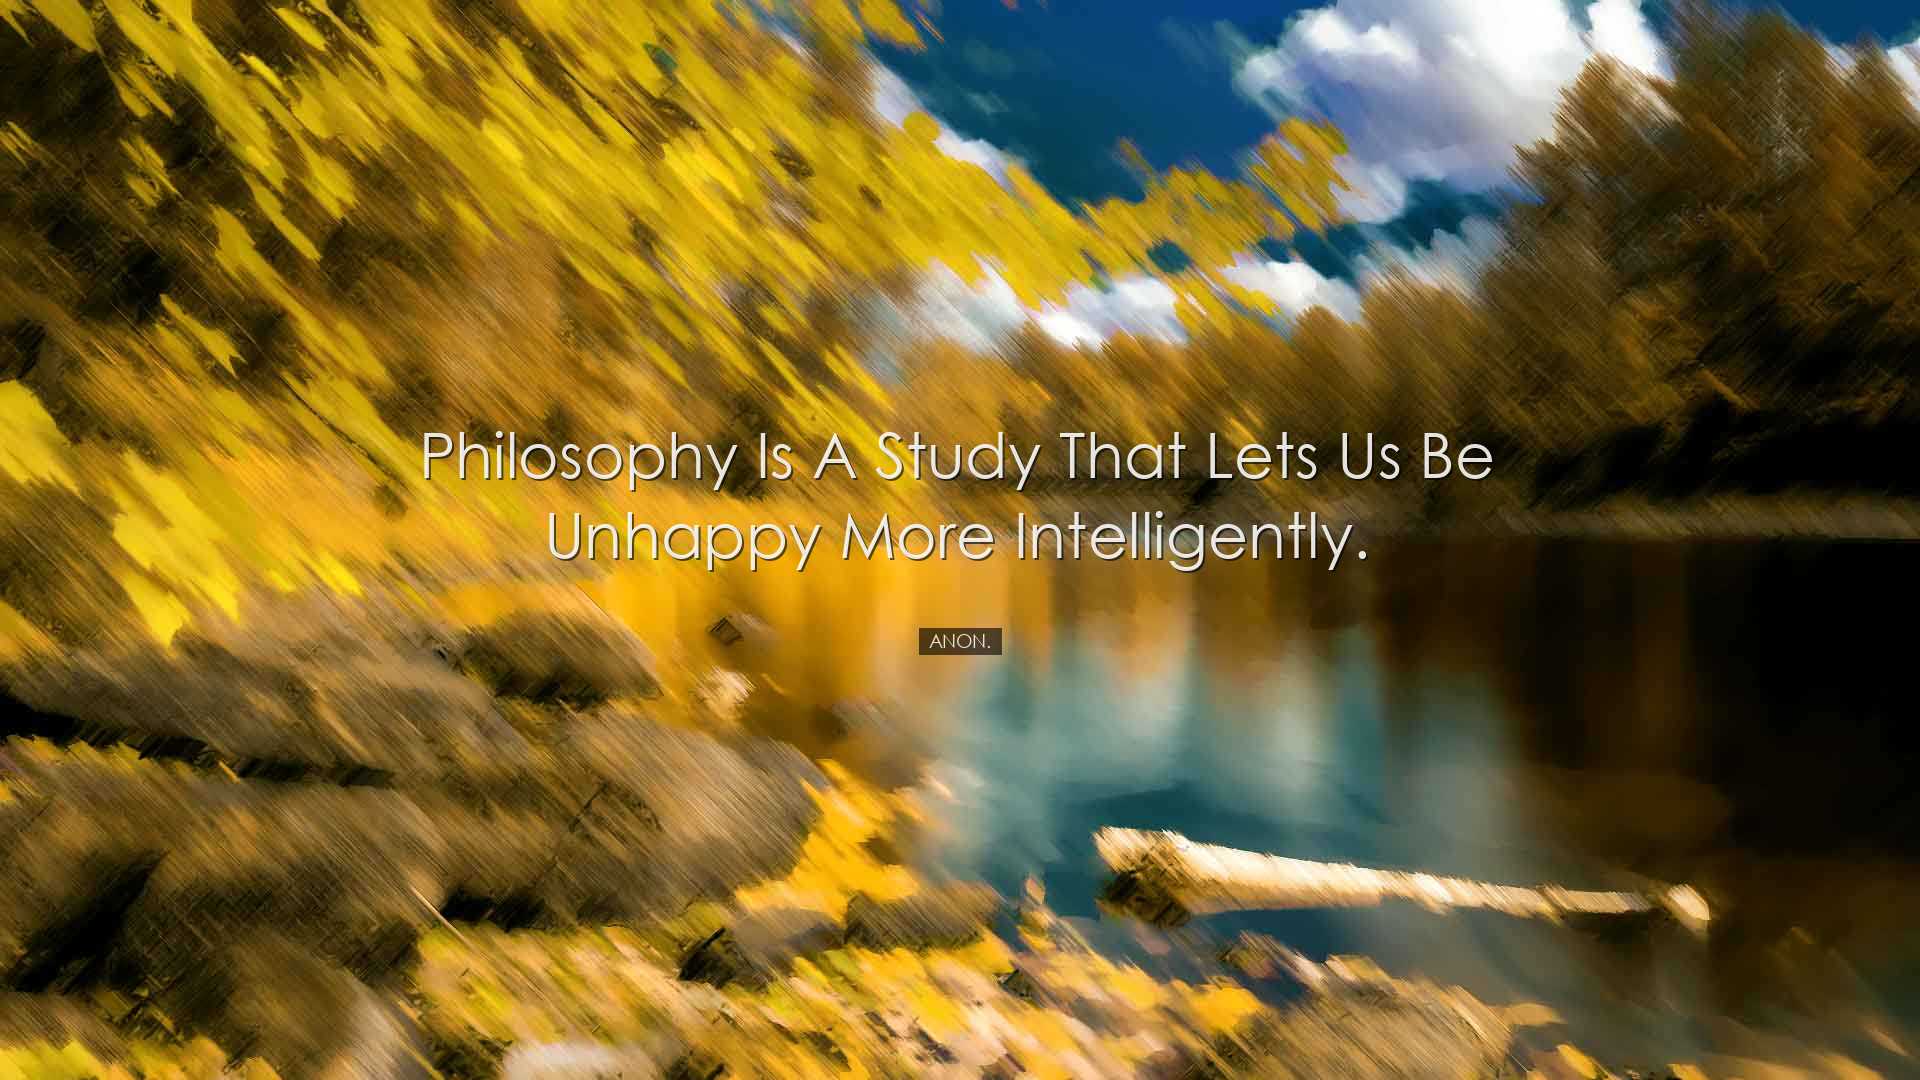 Philosophy is a study that lets us be unhappy more intelligently.